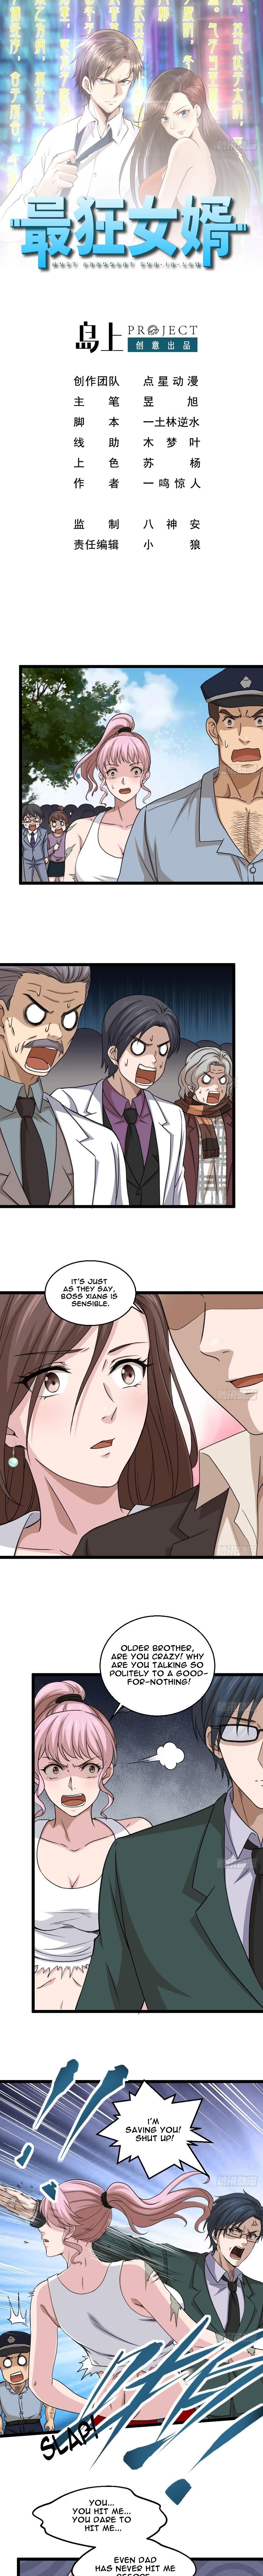 Capital’s most crazy doctor chapter 16